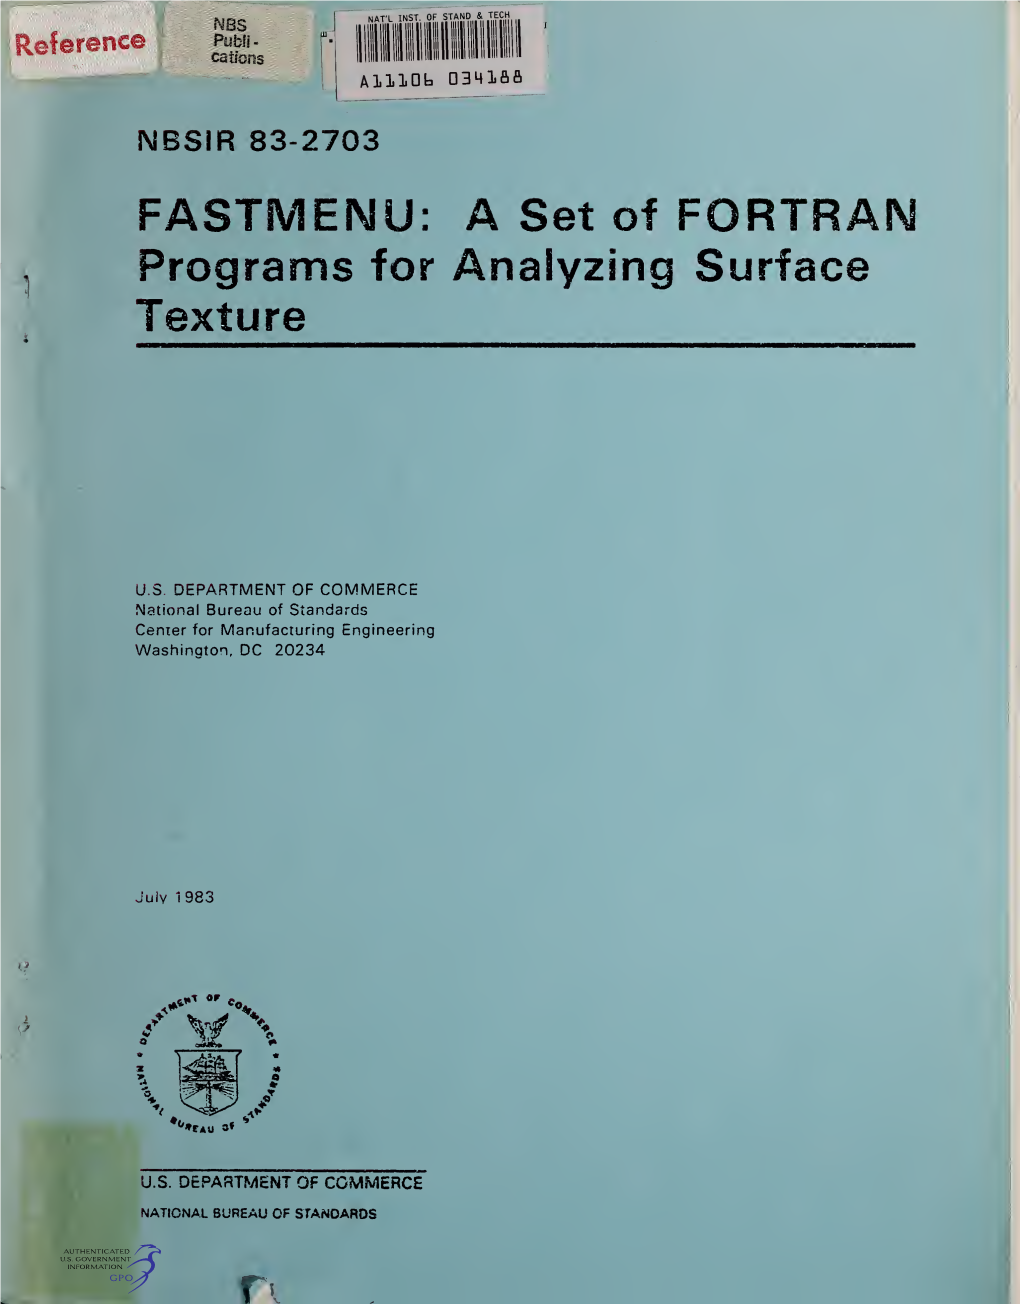 A Set of Fortran Programs for Analyzing Surface Texture